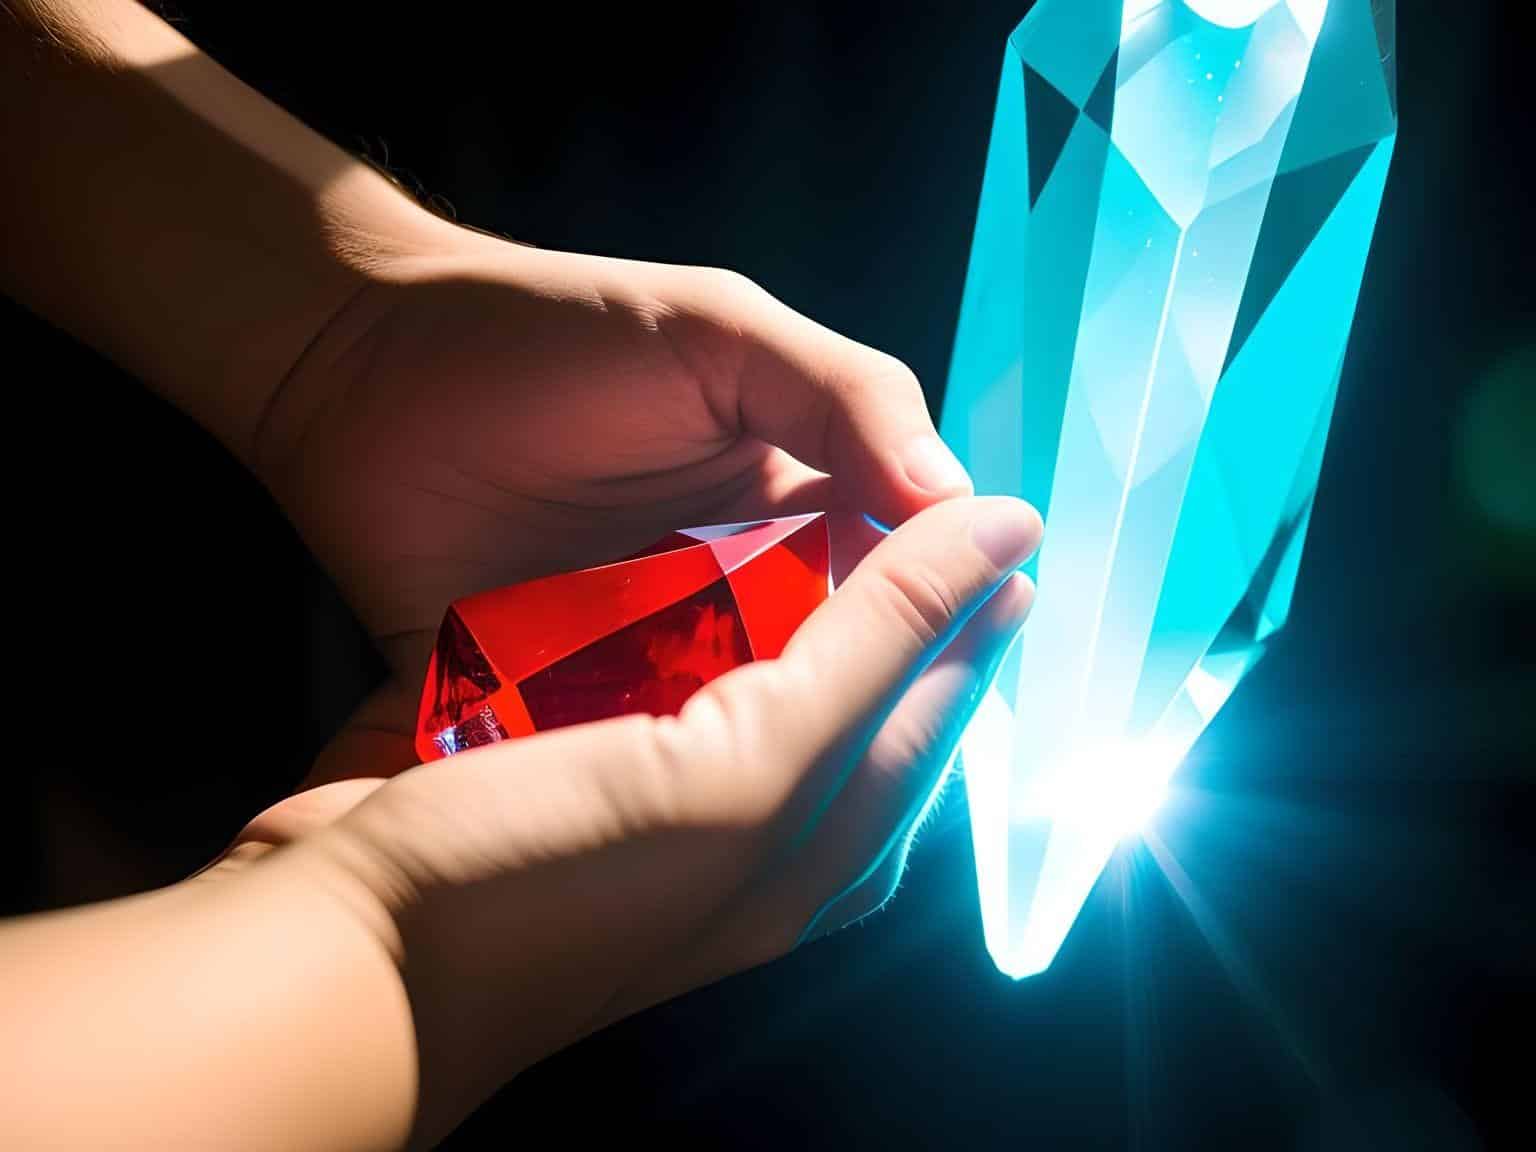 An image depicting a person holding their hands over a crystal, representing clairsentience and energy sensing